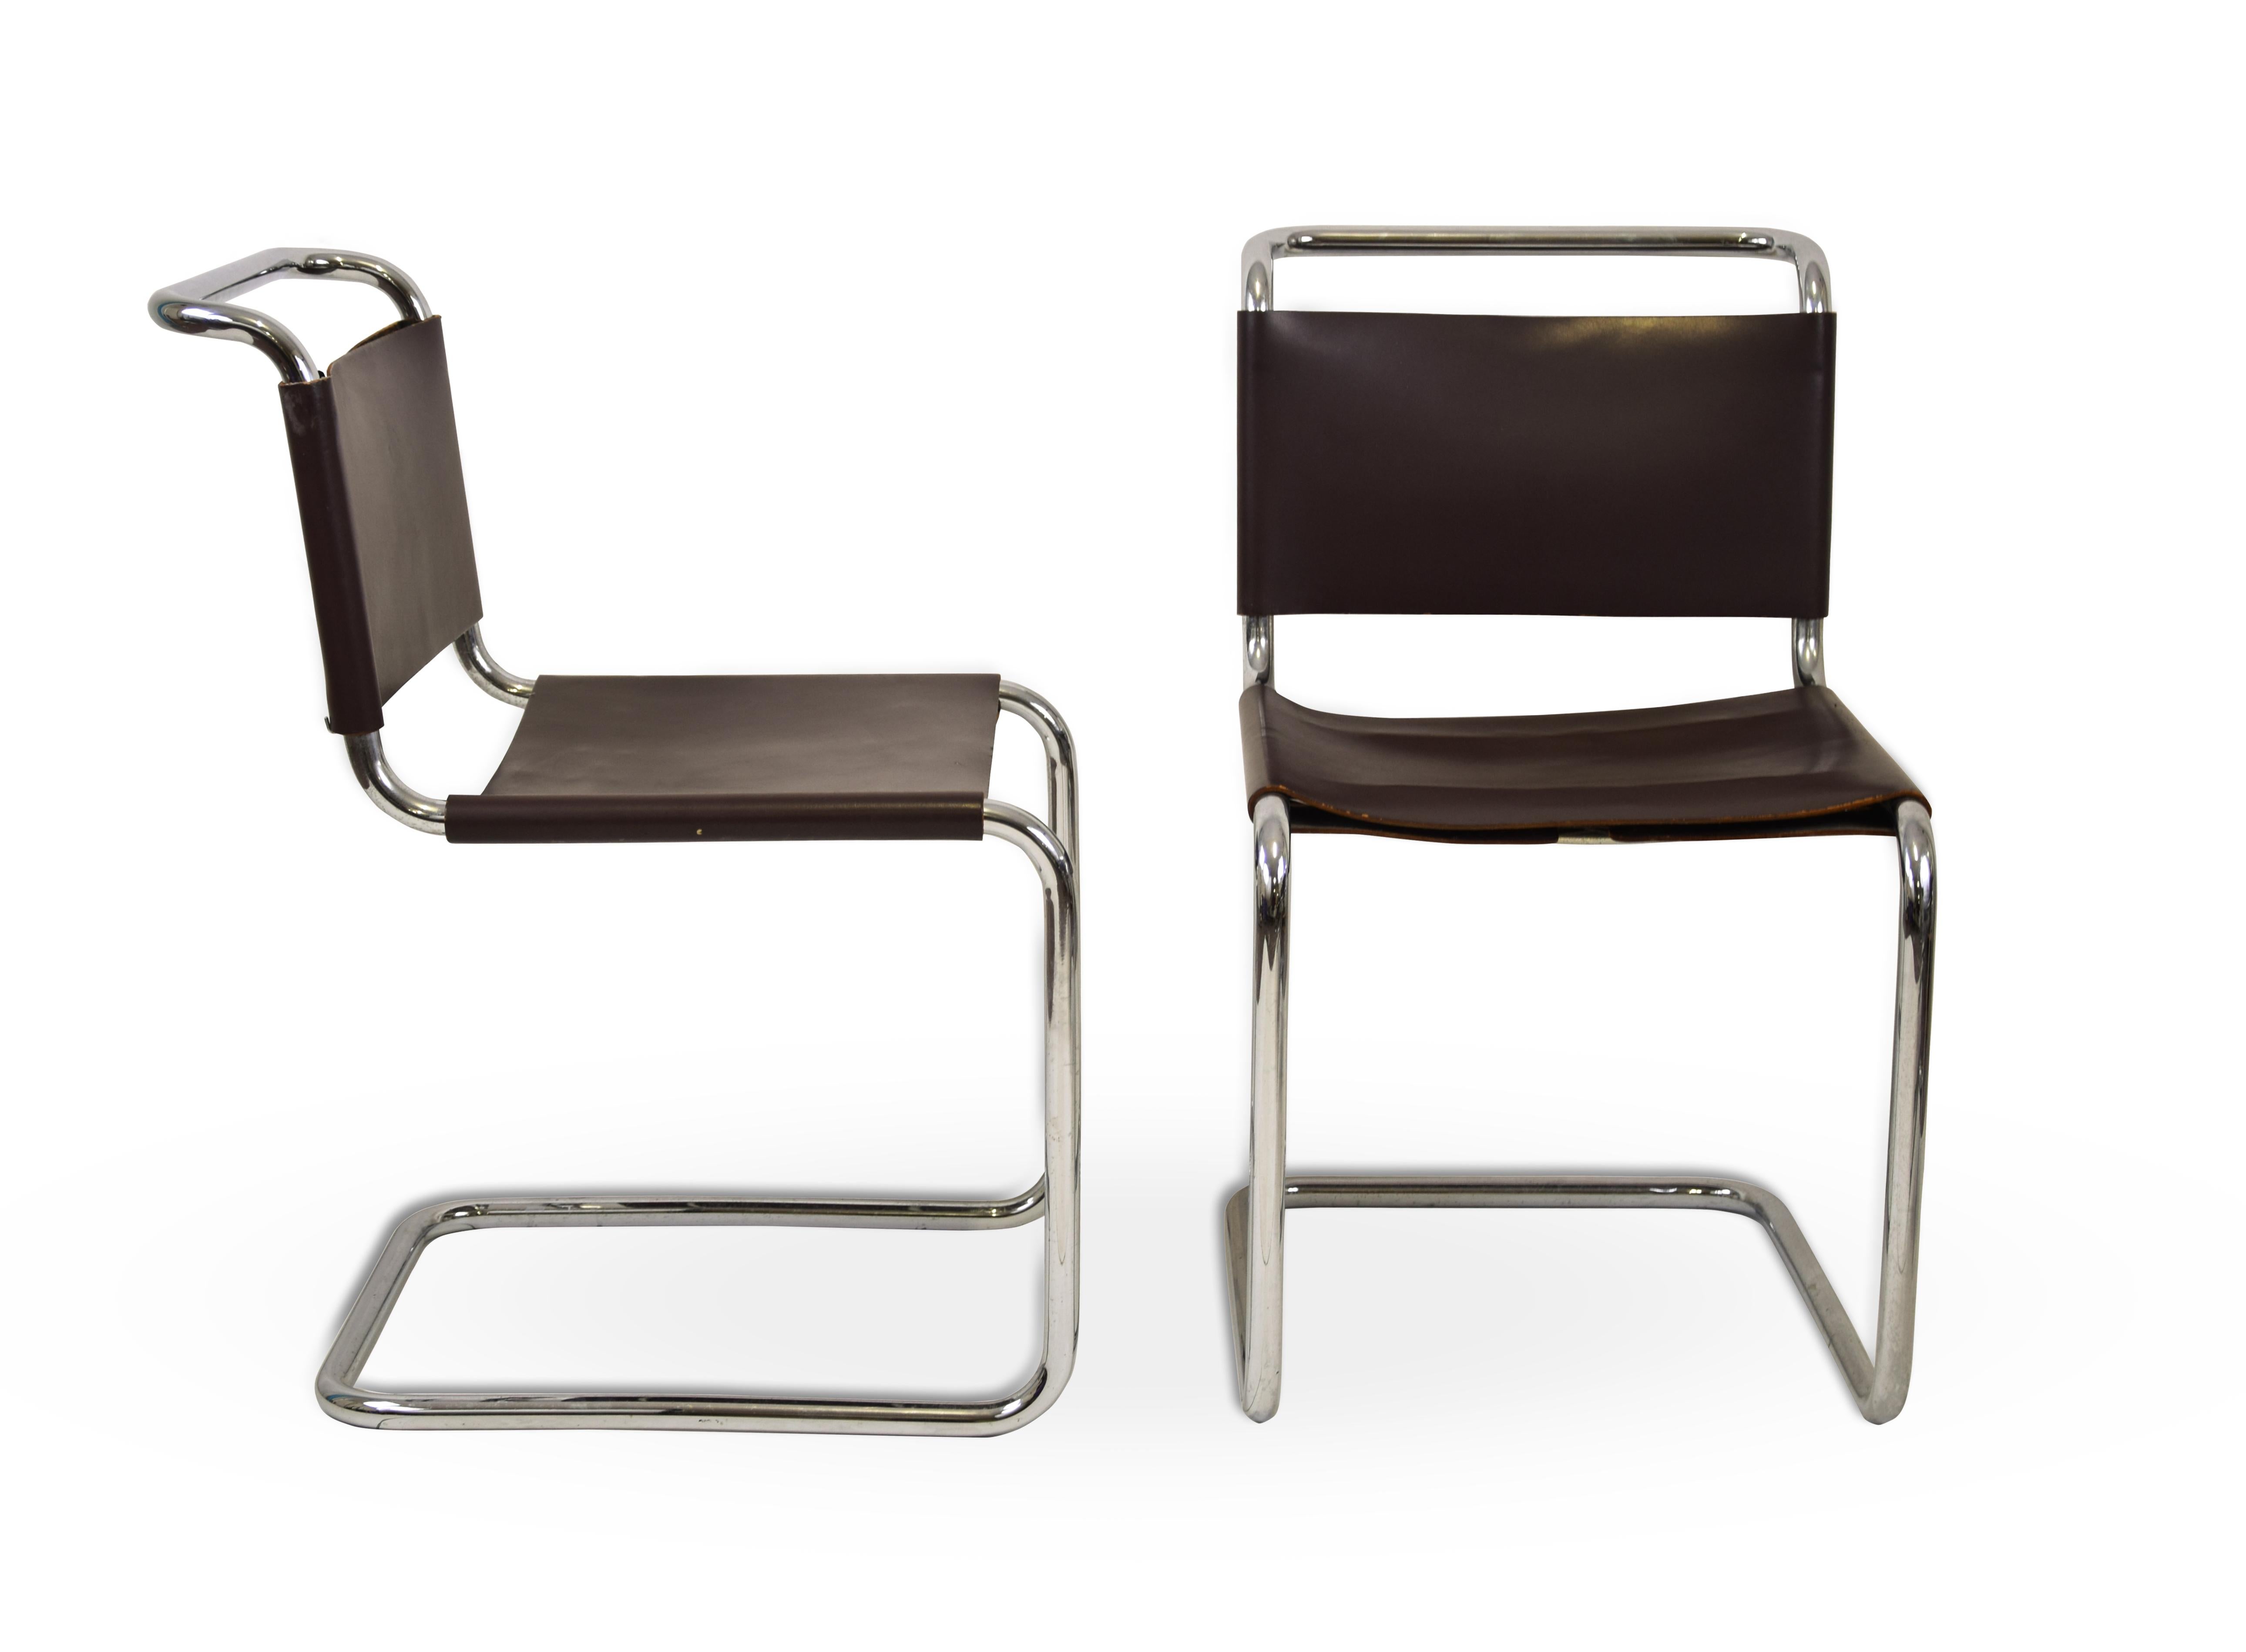 This is a beautiful Set of 8 Spoleto chairs, designed by Knoll Studio Company in the 1970s.

Each chair has a tubular frame in chromed steel, the seat and back in thick leather, stretched with nylon laces. 

Cover in dark brown leather.

The